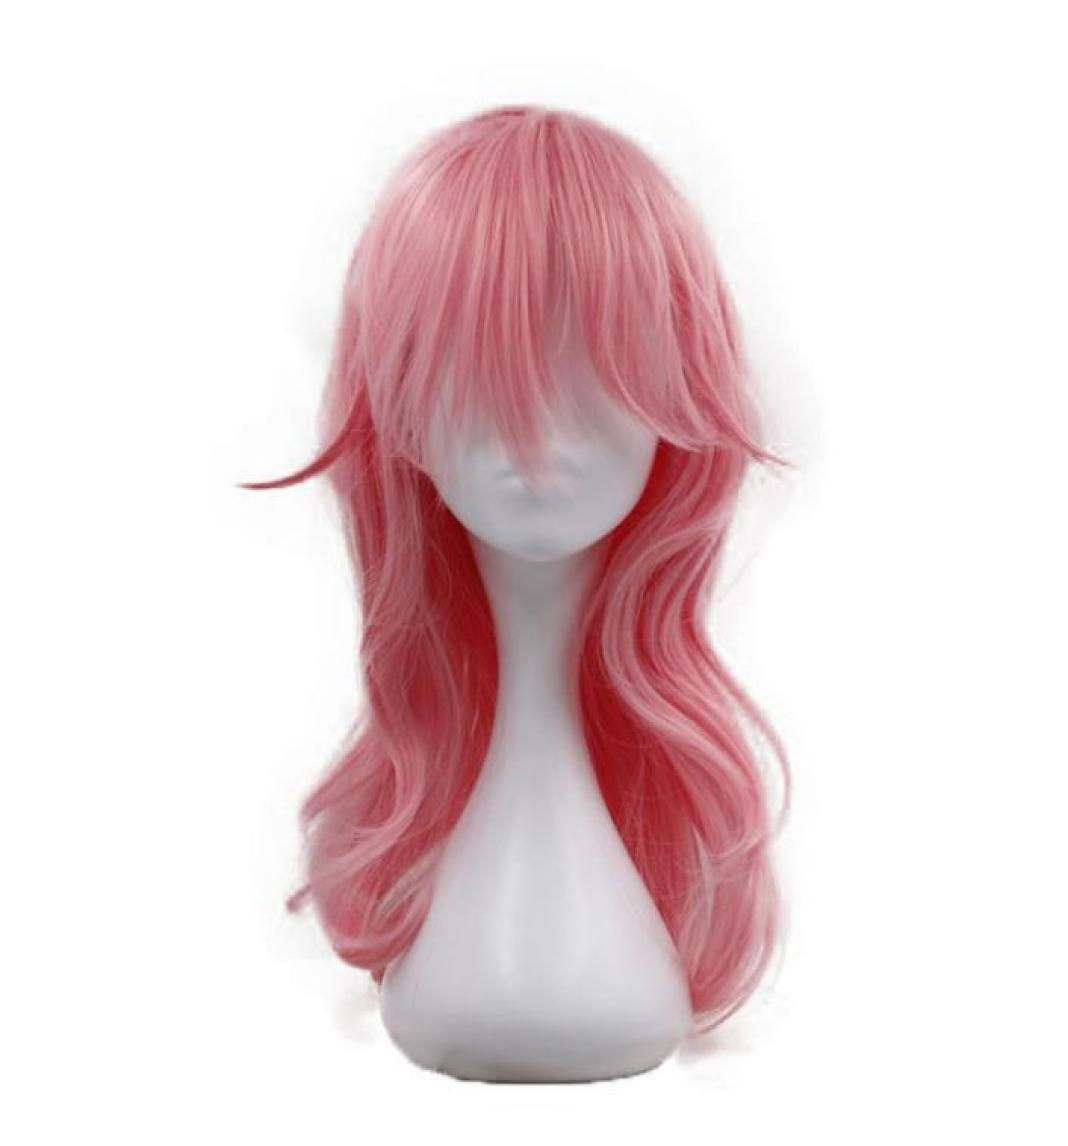 

Pink Wigs Synthetic Wigs Cosplay Wig Long Slight Wavy With Ombre Bangs High Temperatire Fiber Hair For Women6517119, Ombre color